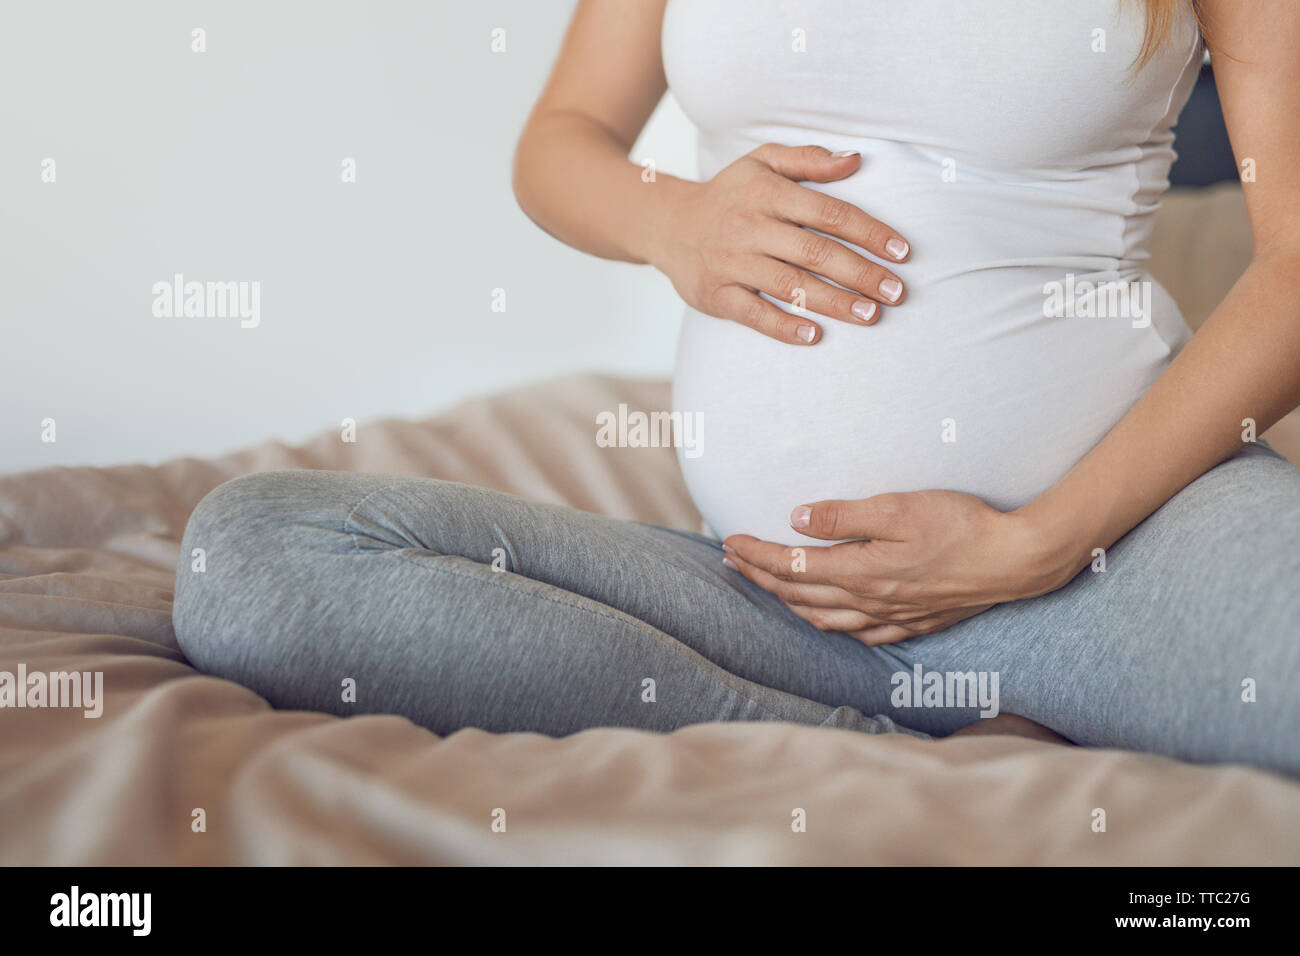 Young pregnant woman cradling her baby bump or belly with her hands in a close up cropped view conceptual of maternal love Stock Photo